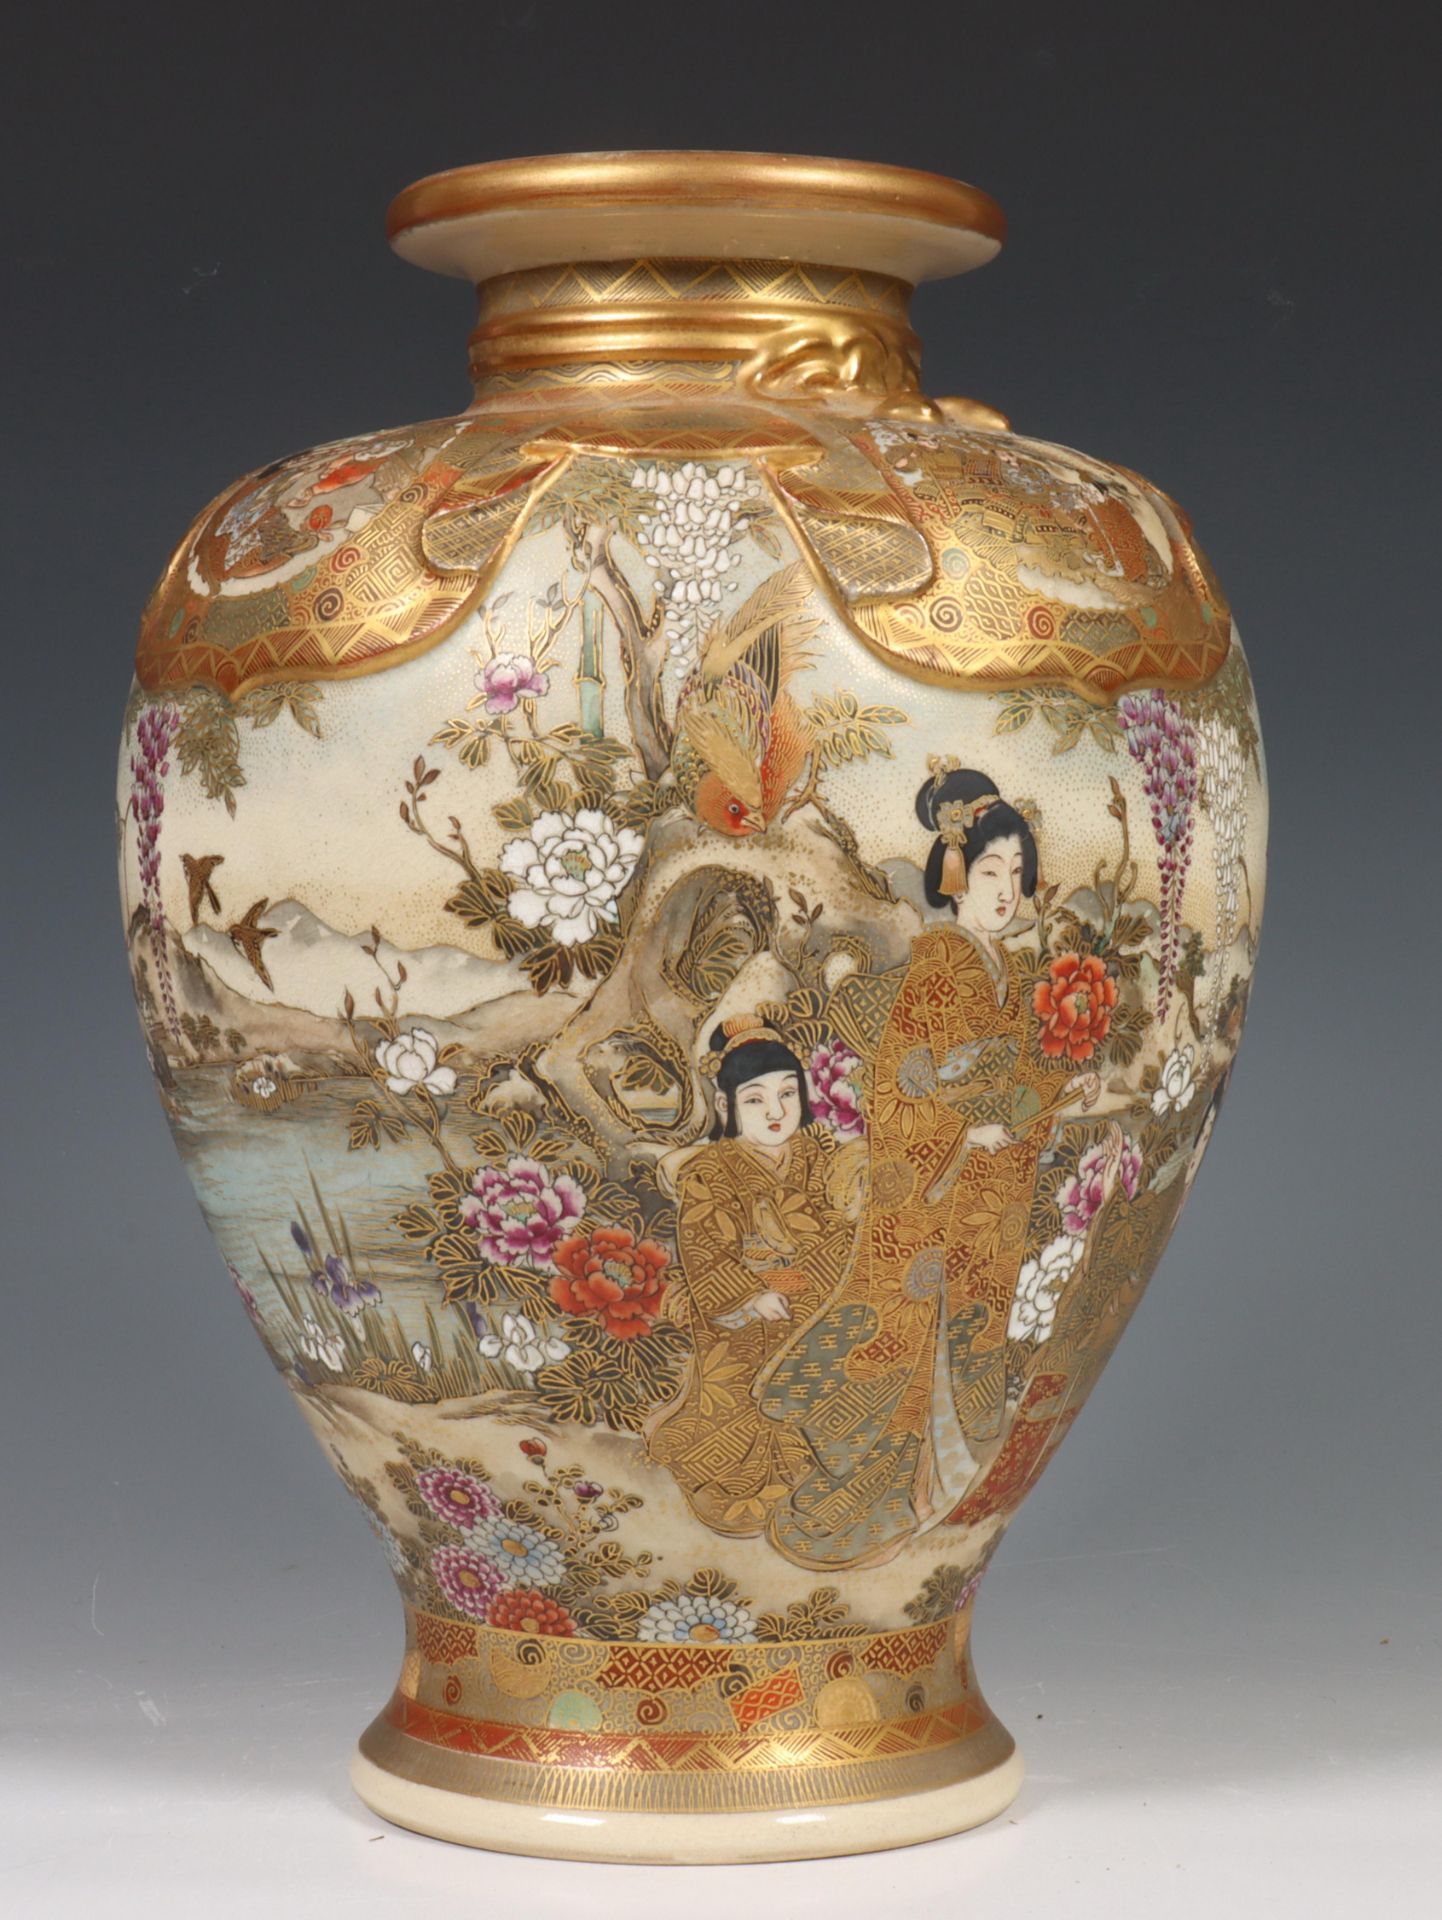 Japan, Satsuma porcelain vase, late 19th century, decorated with elegant ladies in a flower garden - Image 6 of 10